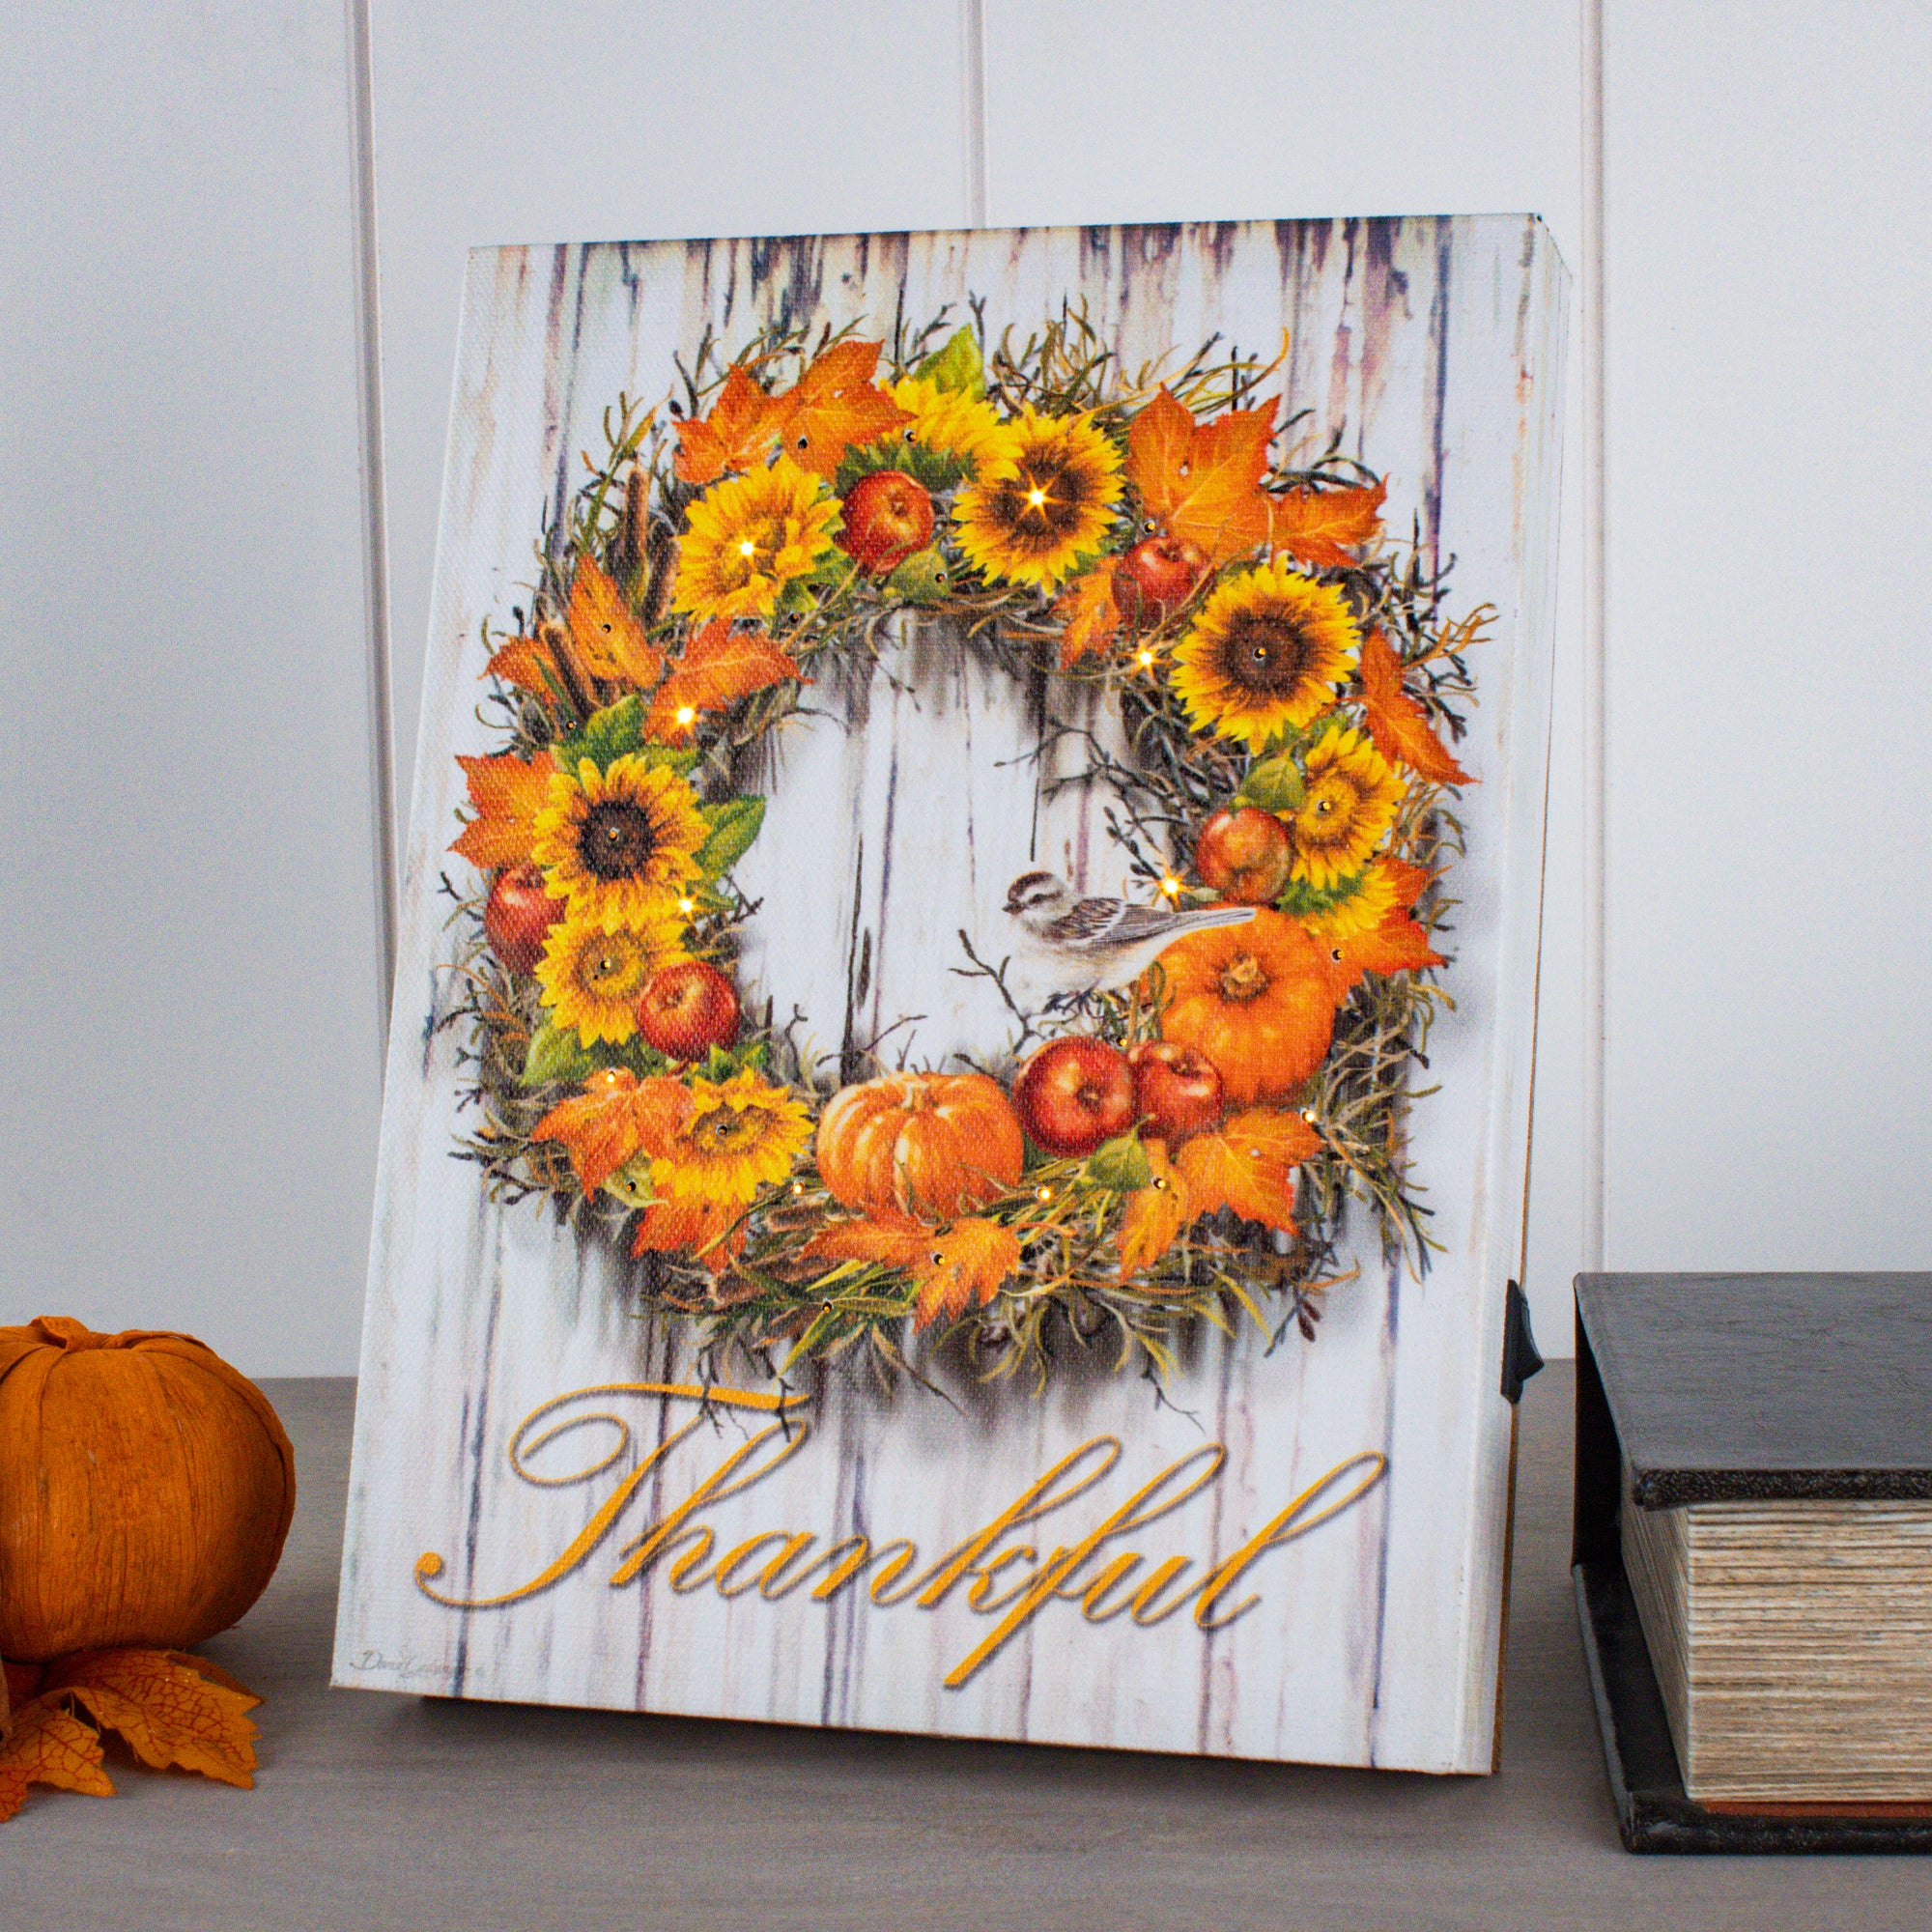 Thankful 8x6 Lighted Tabletop Canvas